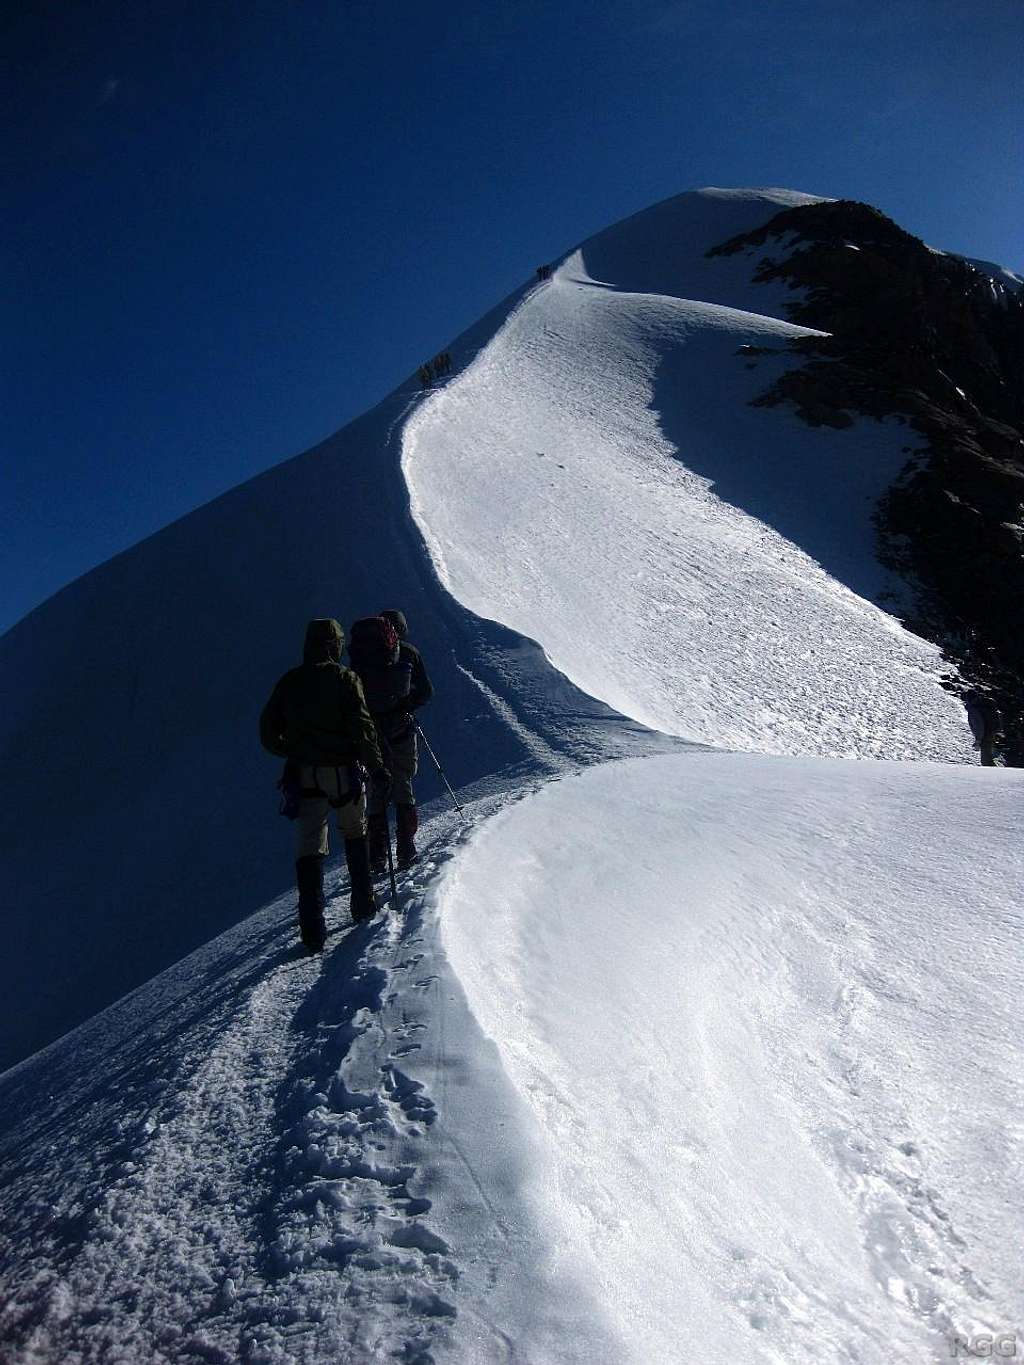 Heading out on the Pollux summit ridge